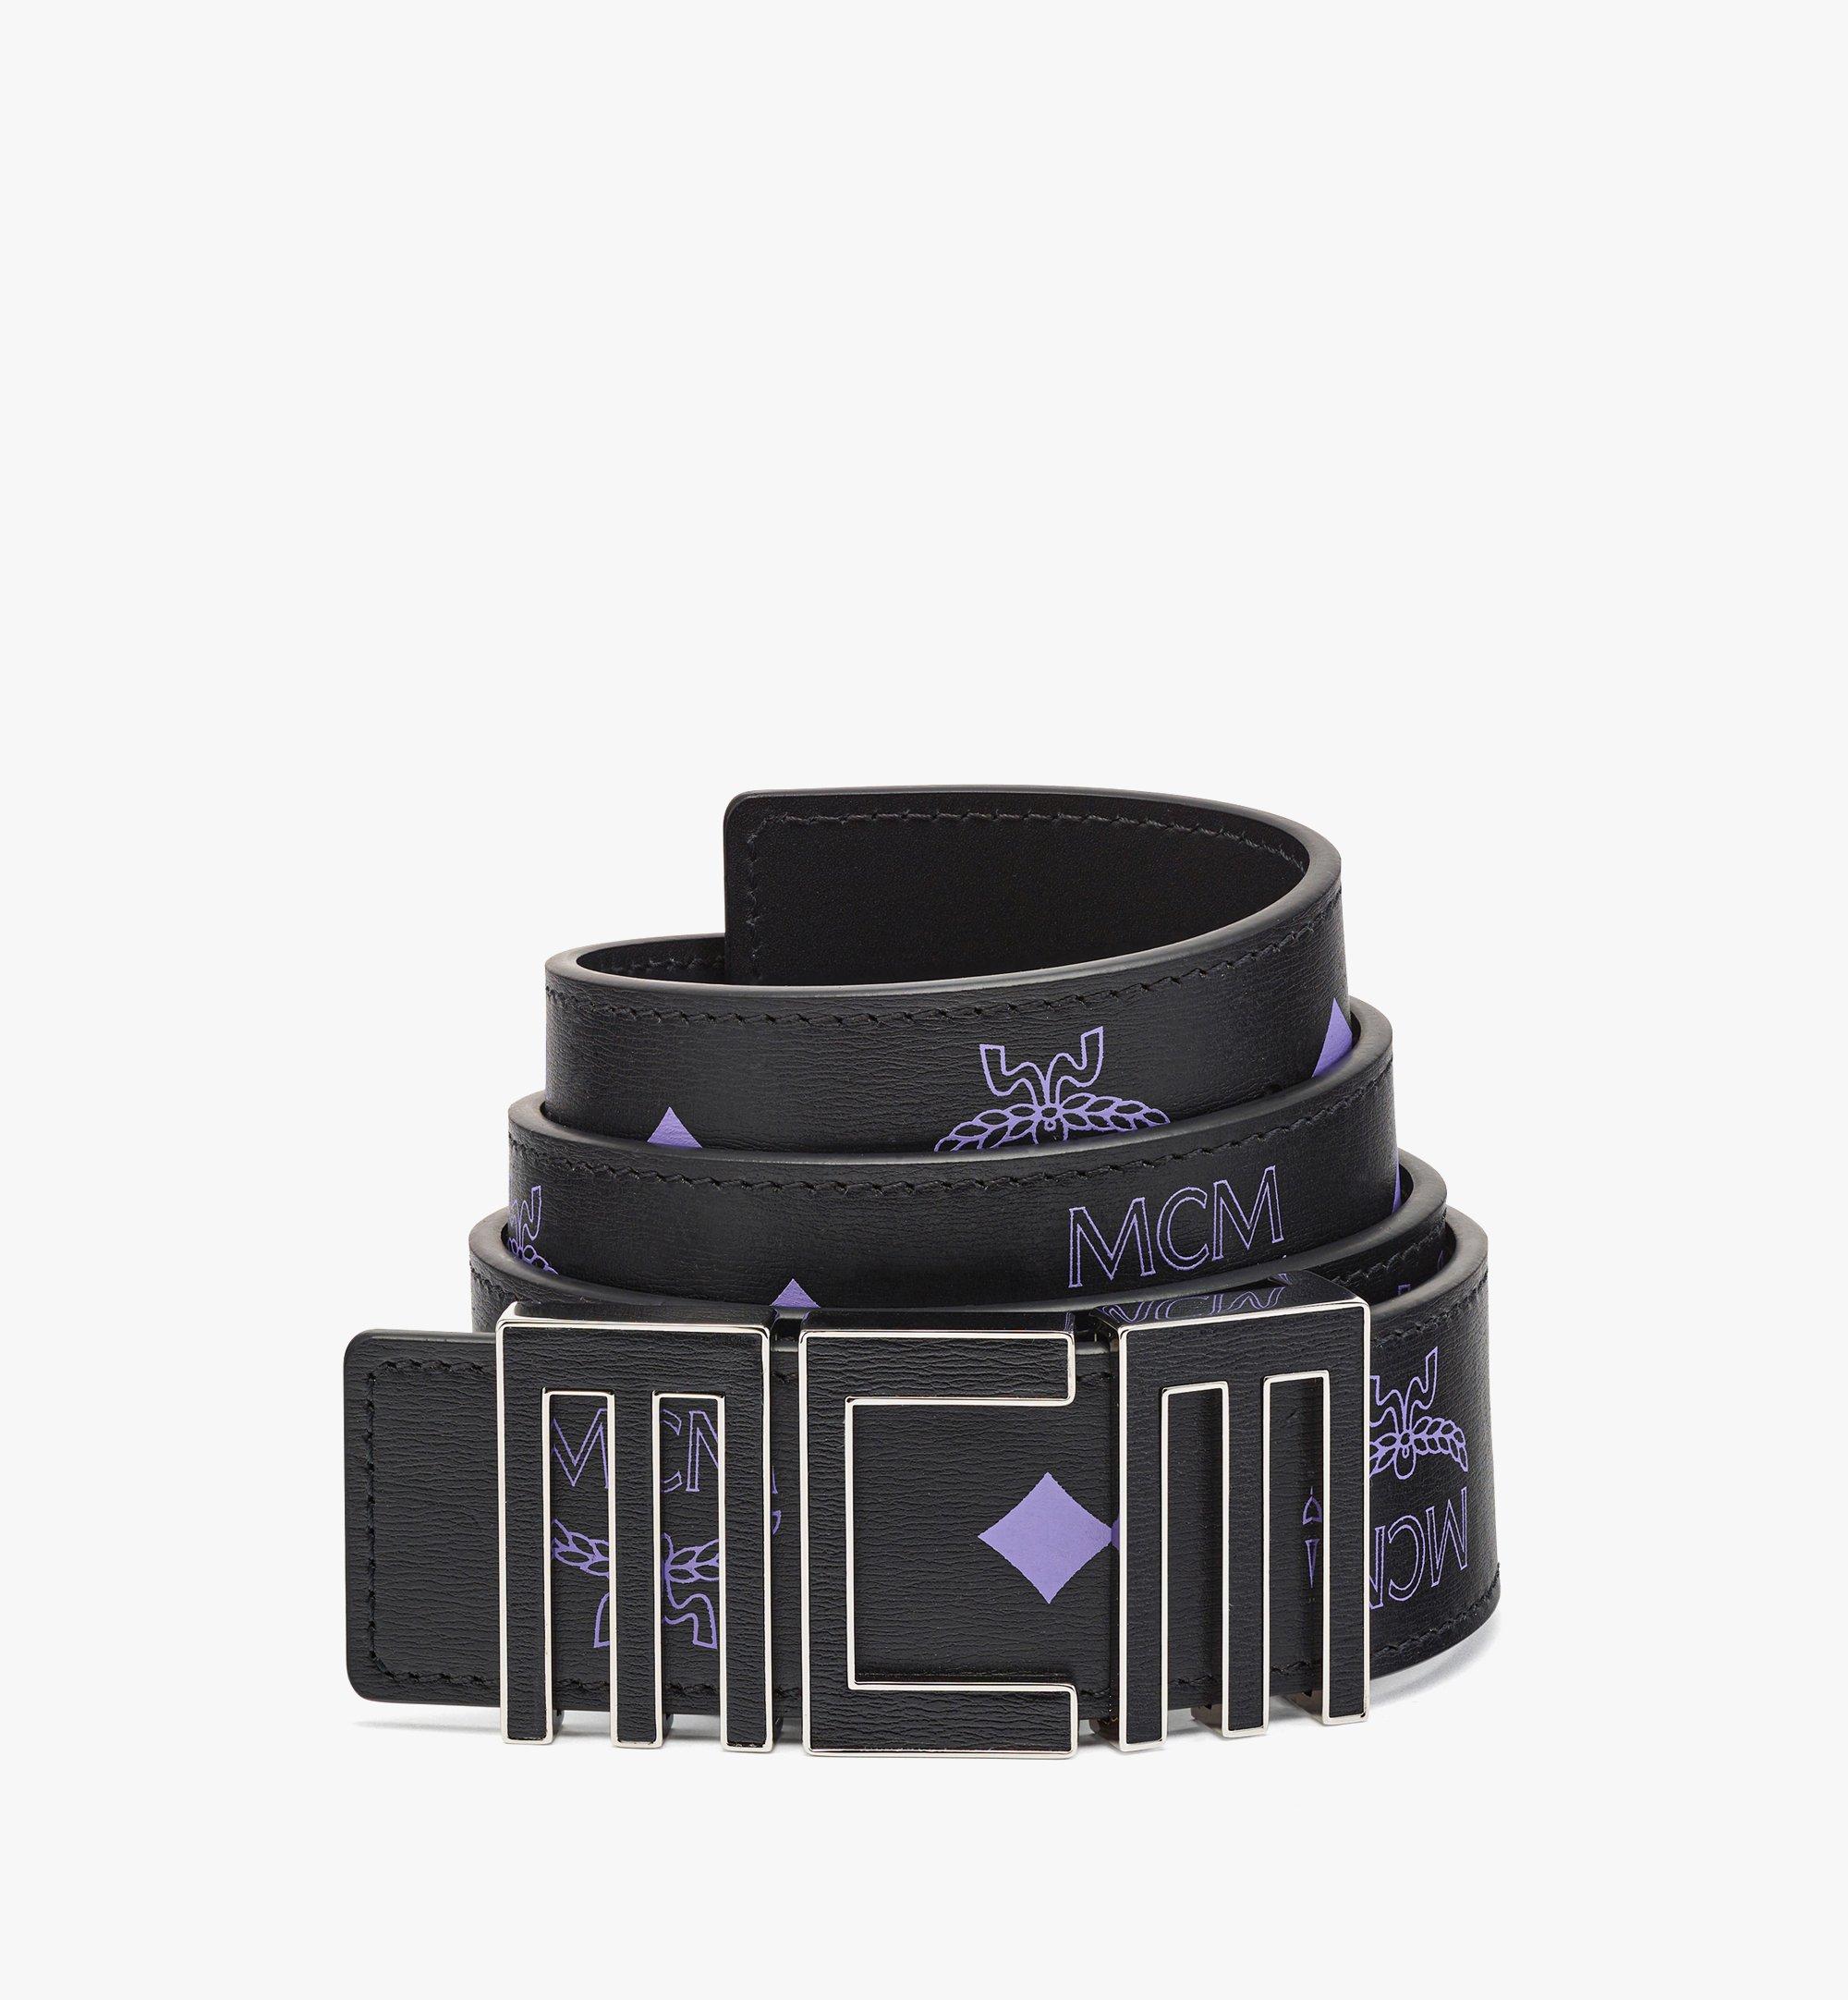 MCM Leather Inlay Tech MCM Reversible Belt 1.5” in Embossed Leather Purple MXBCSTC03U4110 Alternate View 1